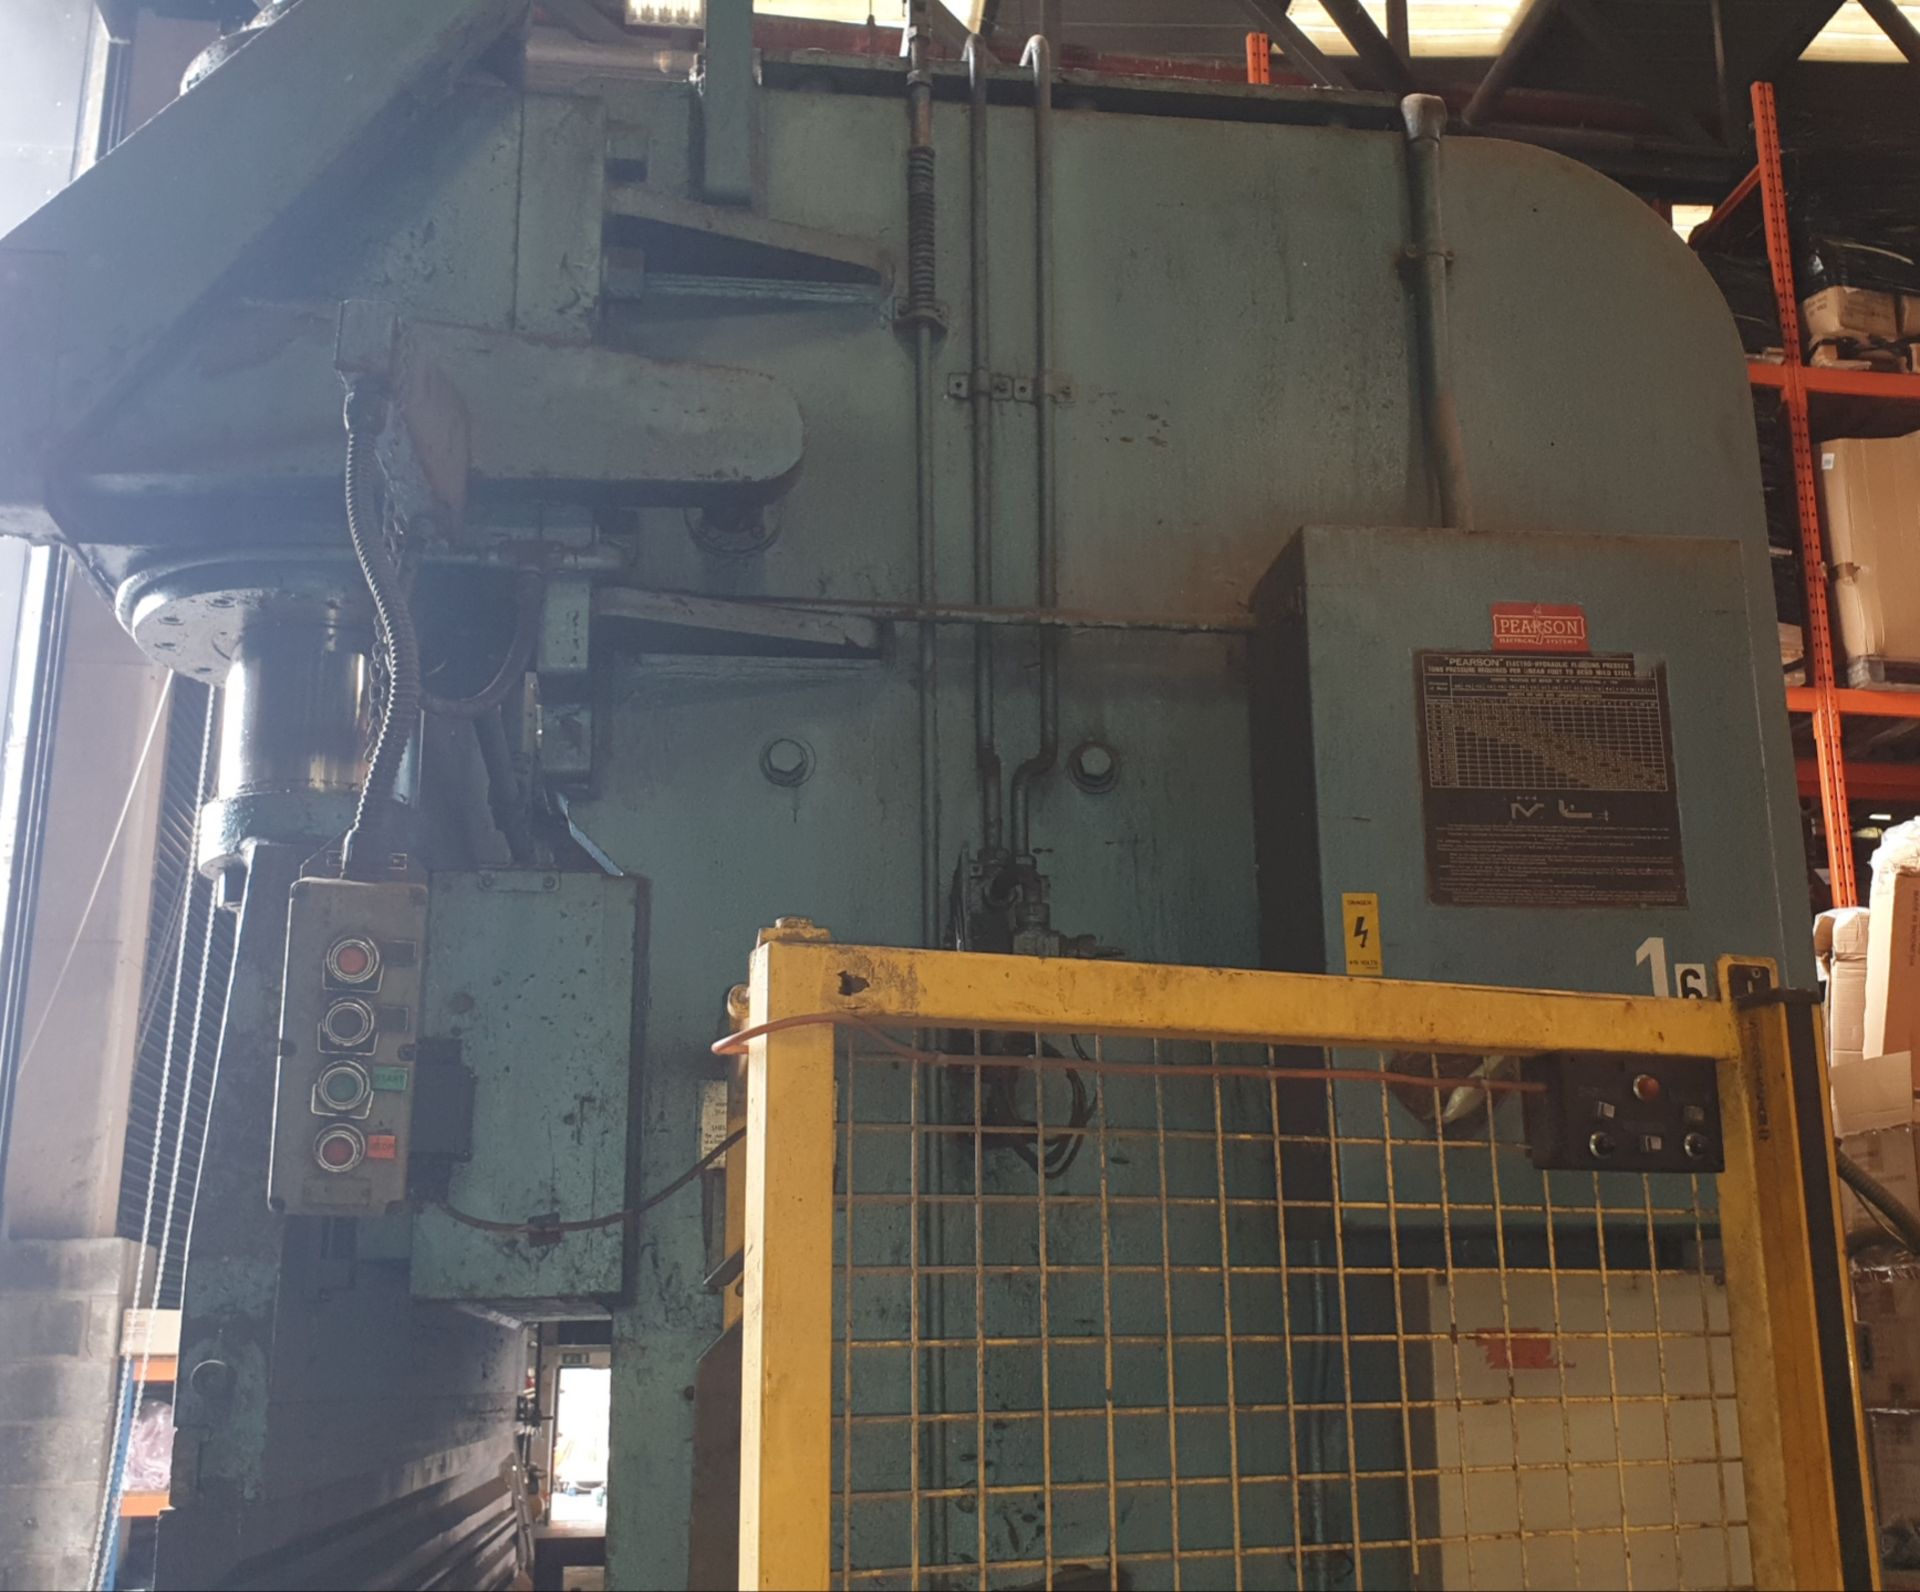 (LOT FOR THURSDAY 28TH MAY AUCTION 12 NOON) 10' PEARSON 280T BRAKE PRESS YEAR 1987 - NO VISIBLE - Image 2 of 2